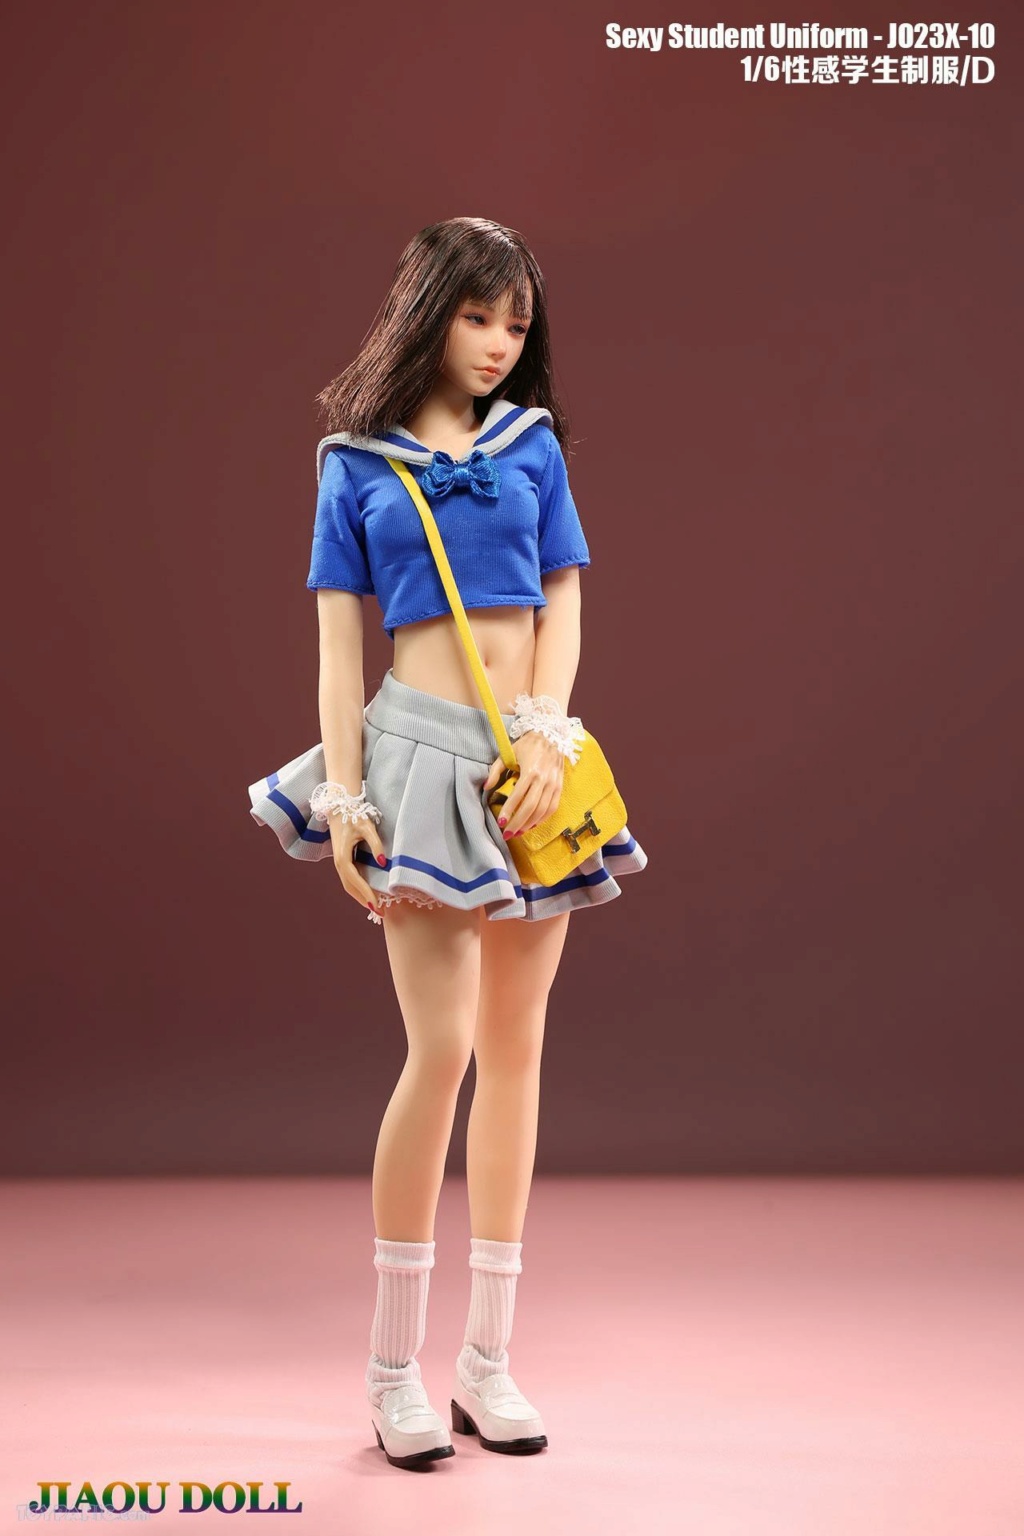 Clothing - NEW PRODUCT: Jiaou Doll: 1/6 Sexy Student Uniform (7 color options) (JO23X-10A-G) (NSFW) 20920231